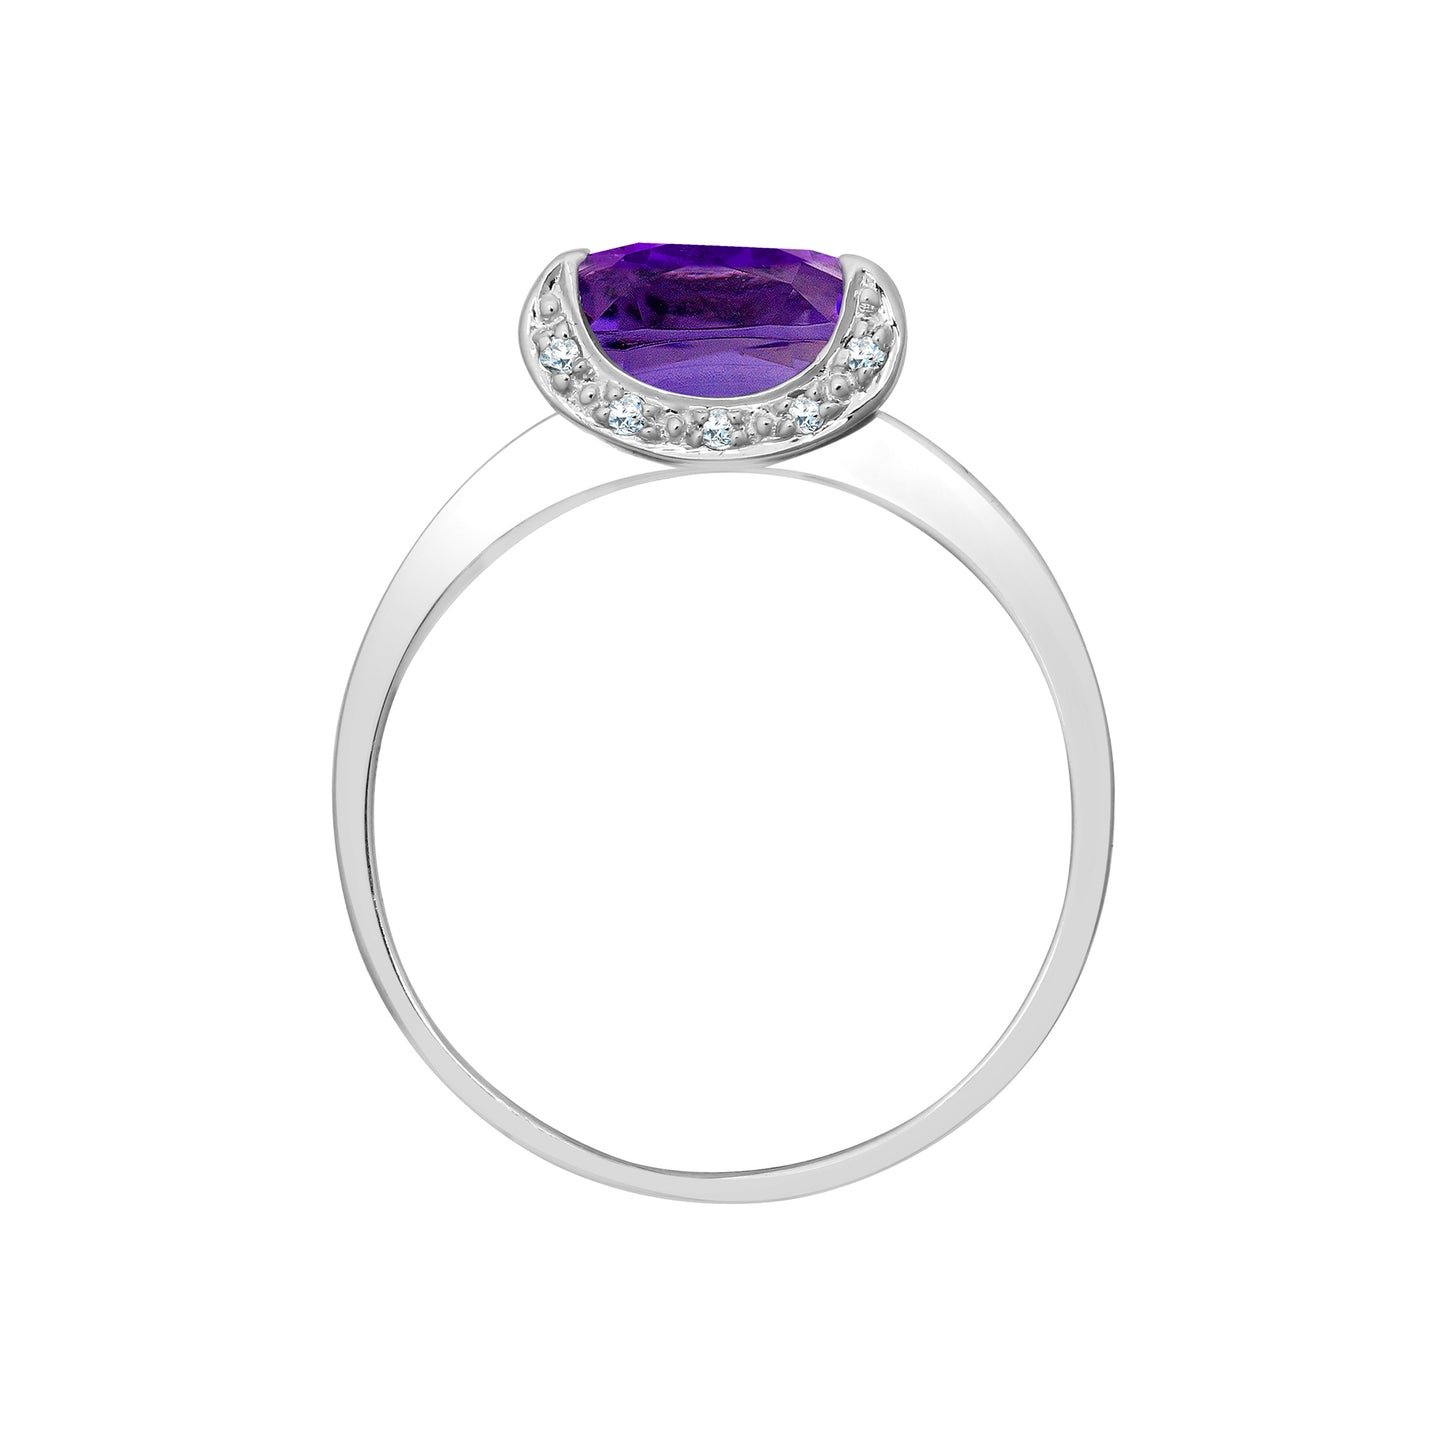 18ct White Gold  Diamond Purple Amethyst Fancy Solitaire Ring 6mm - 18R486